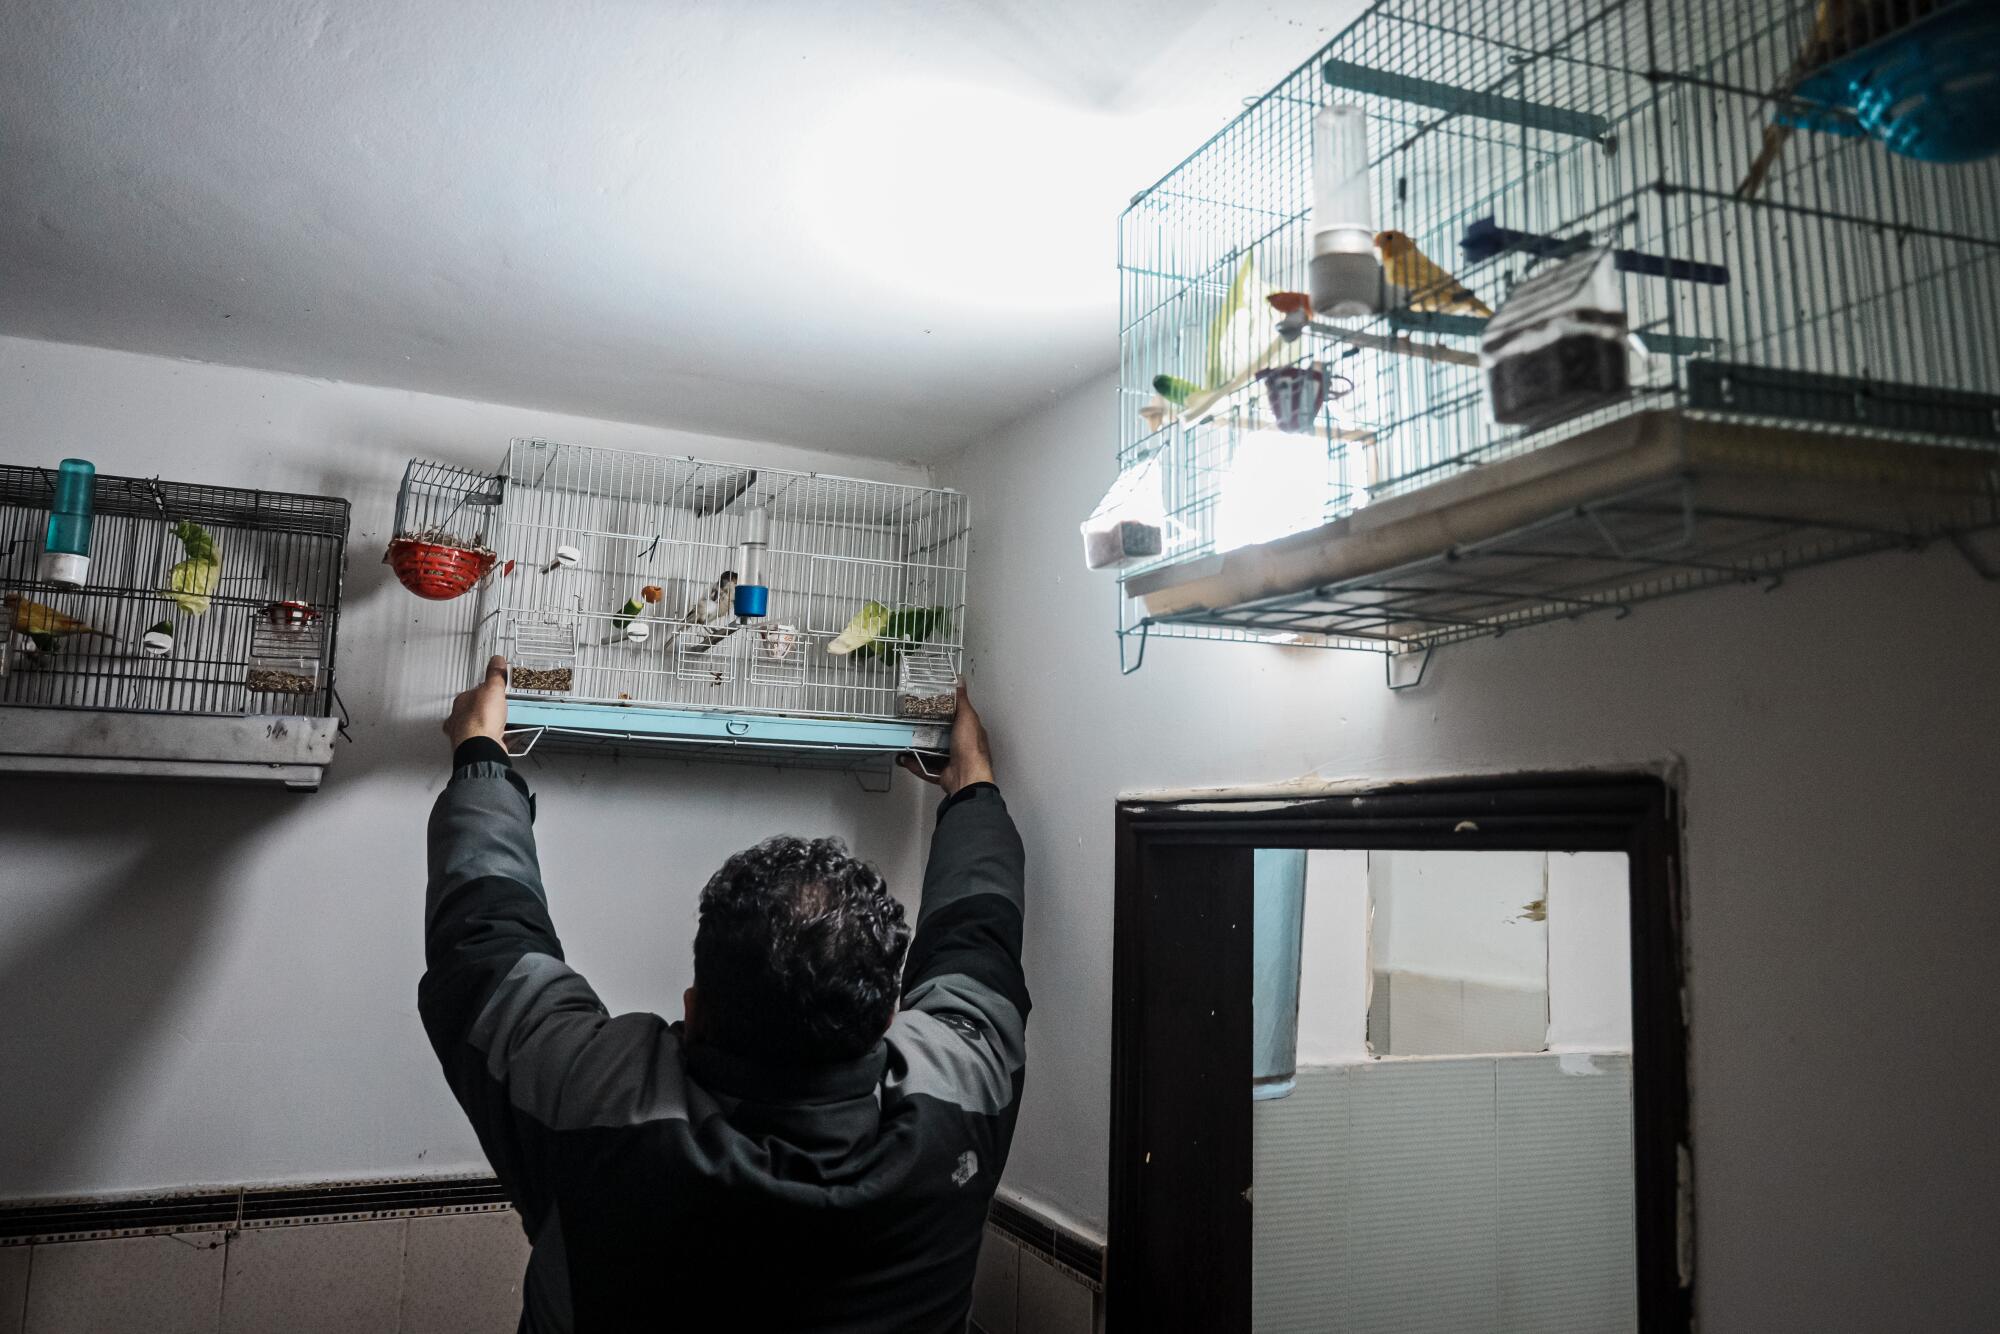 Ahmad Abu Alezz cares for songbirds in several cages high on the wall of his house.